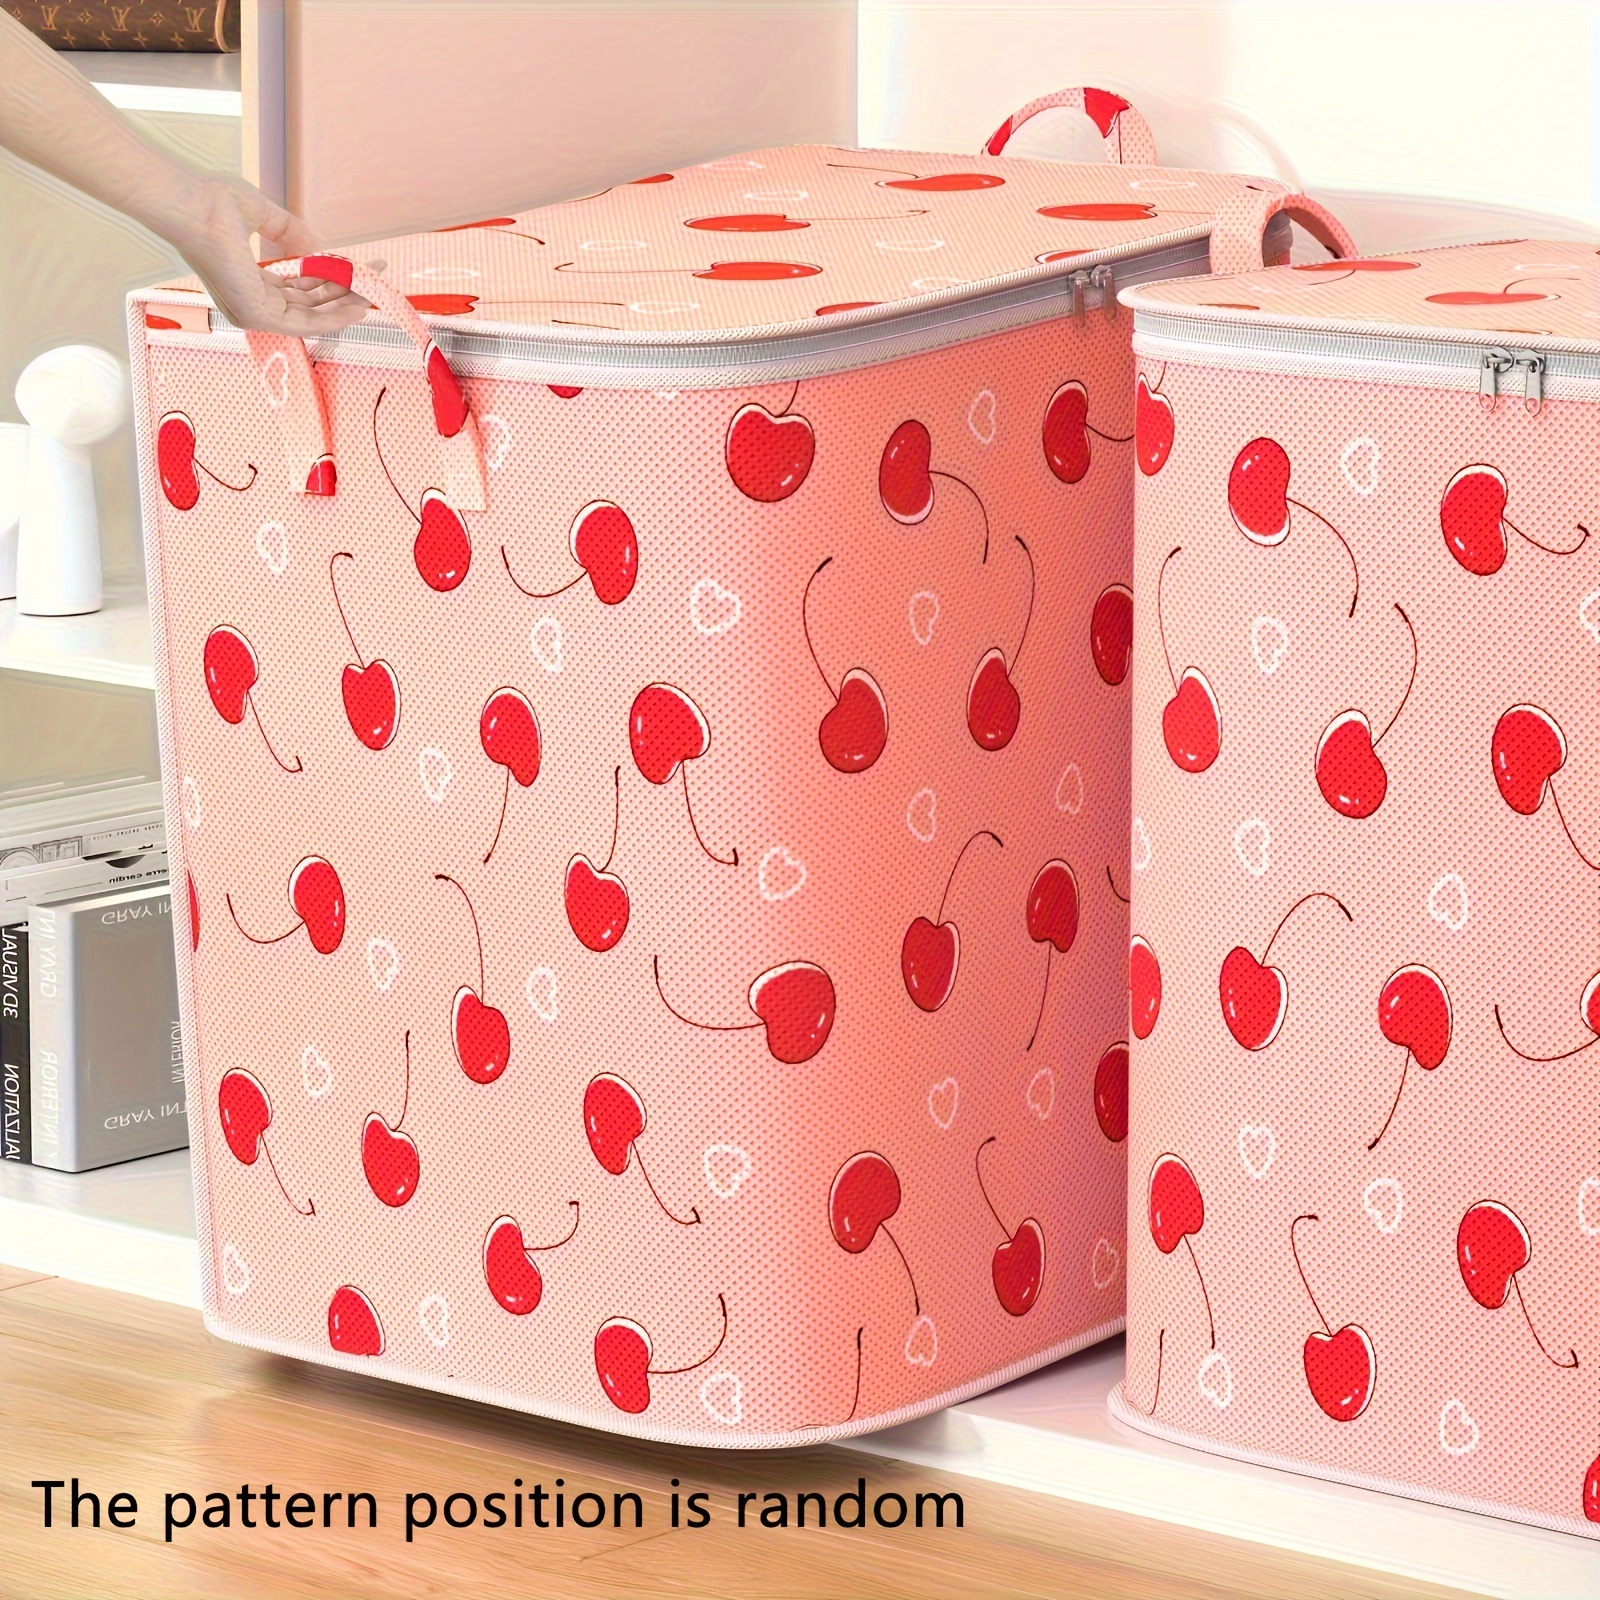 

1pc, Cherry Pattern Storage Bag With Handle, Non-woven Zipper, Dust-proof, Large Capacity Organizer (various Sizes)